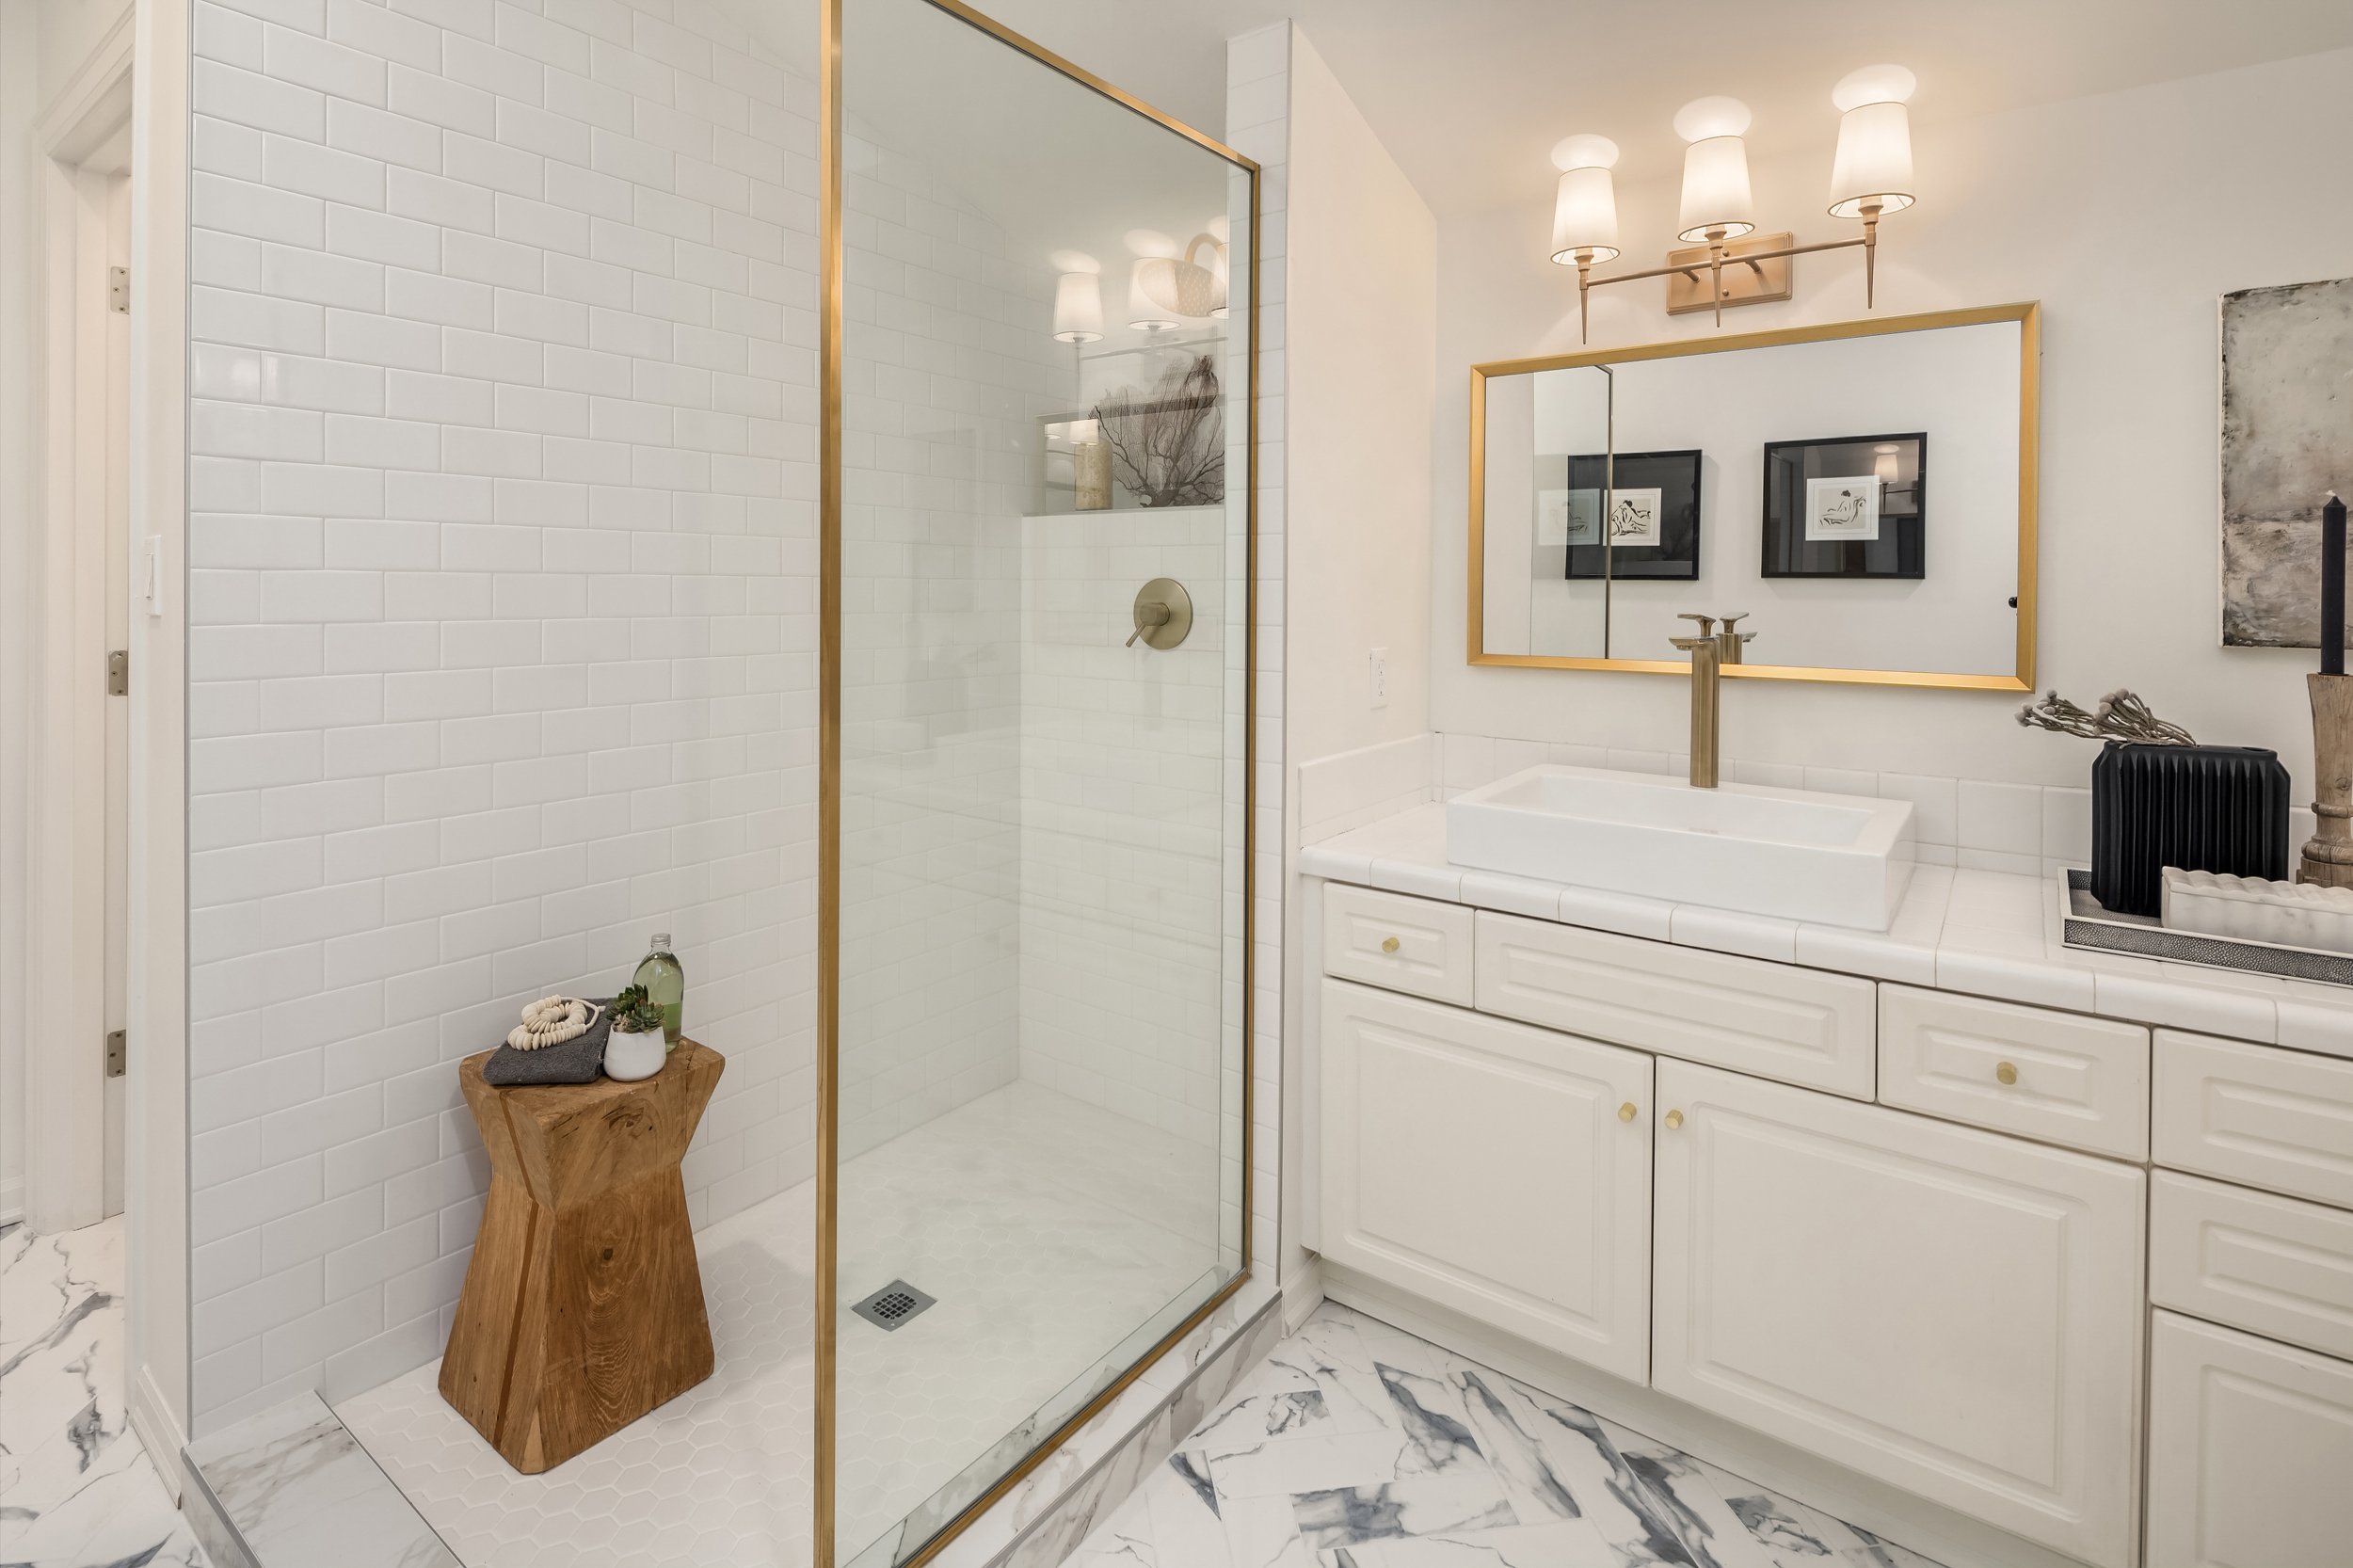  Recently updated primary suite bath. 